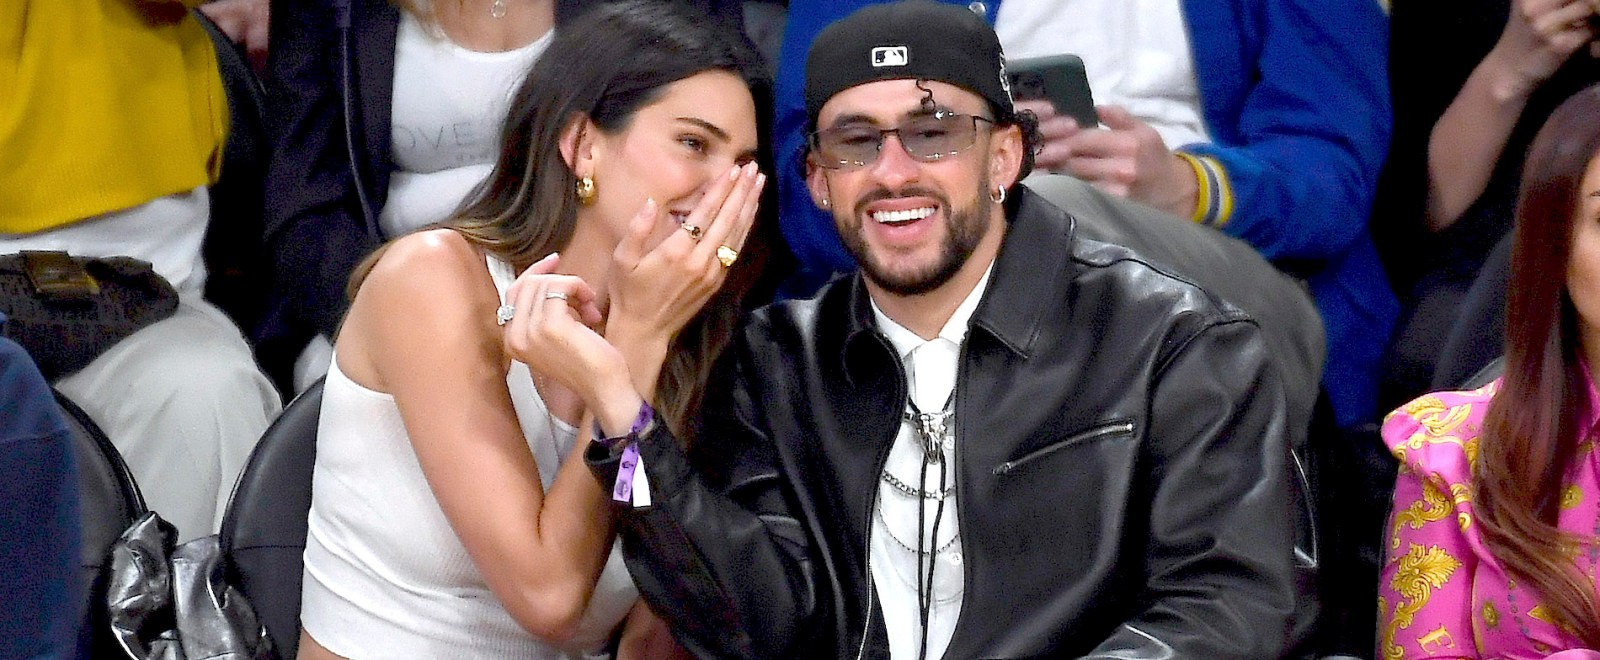 Kendall Jenner and Bad Bunny: A Complete Relationship Timeline